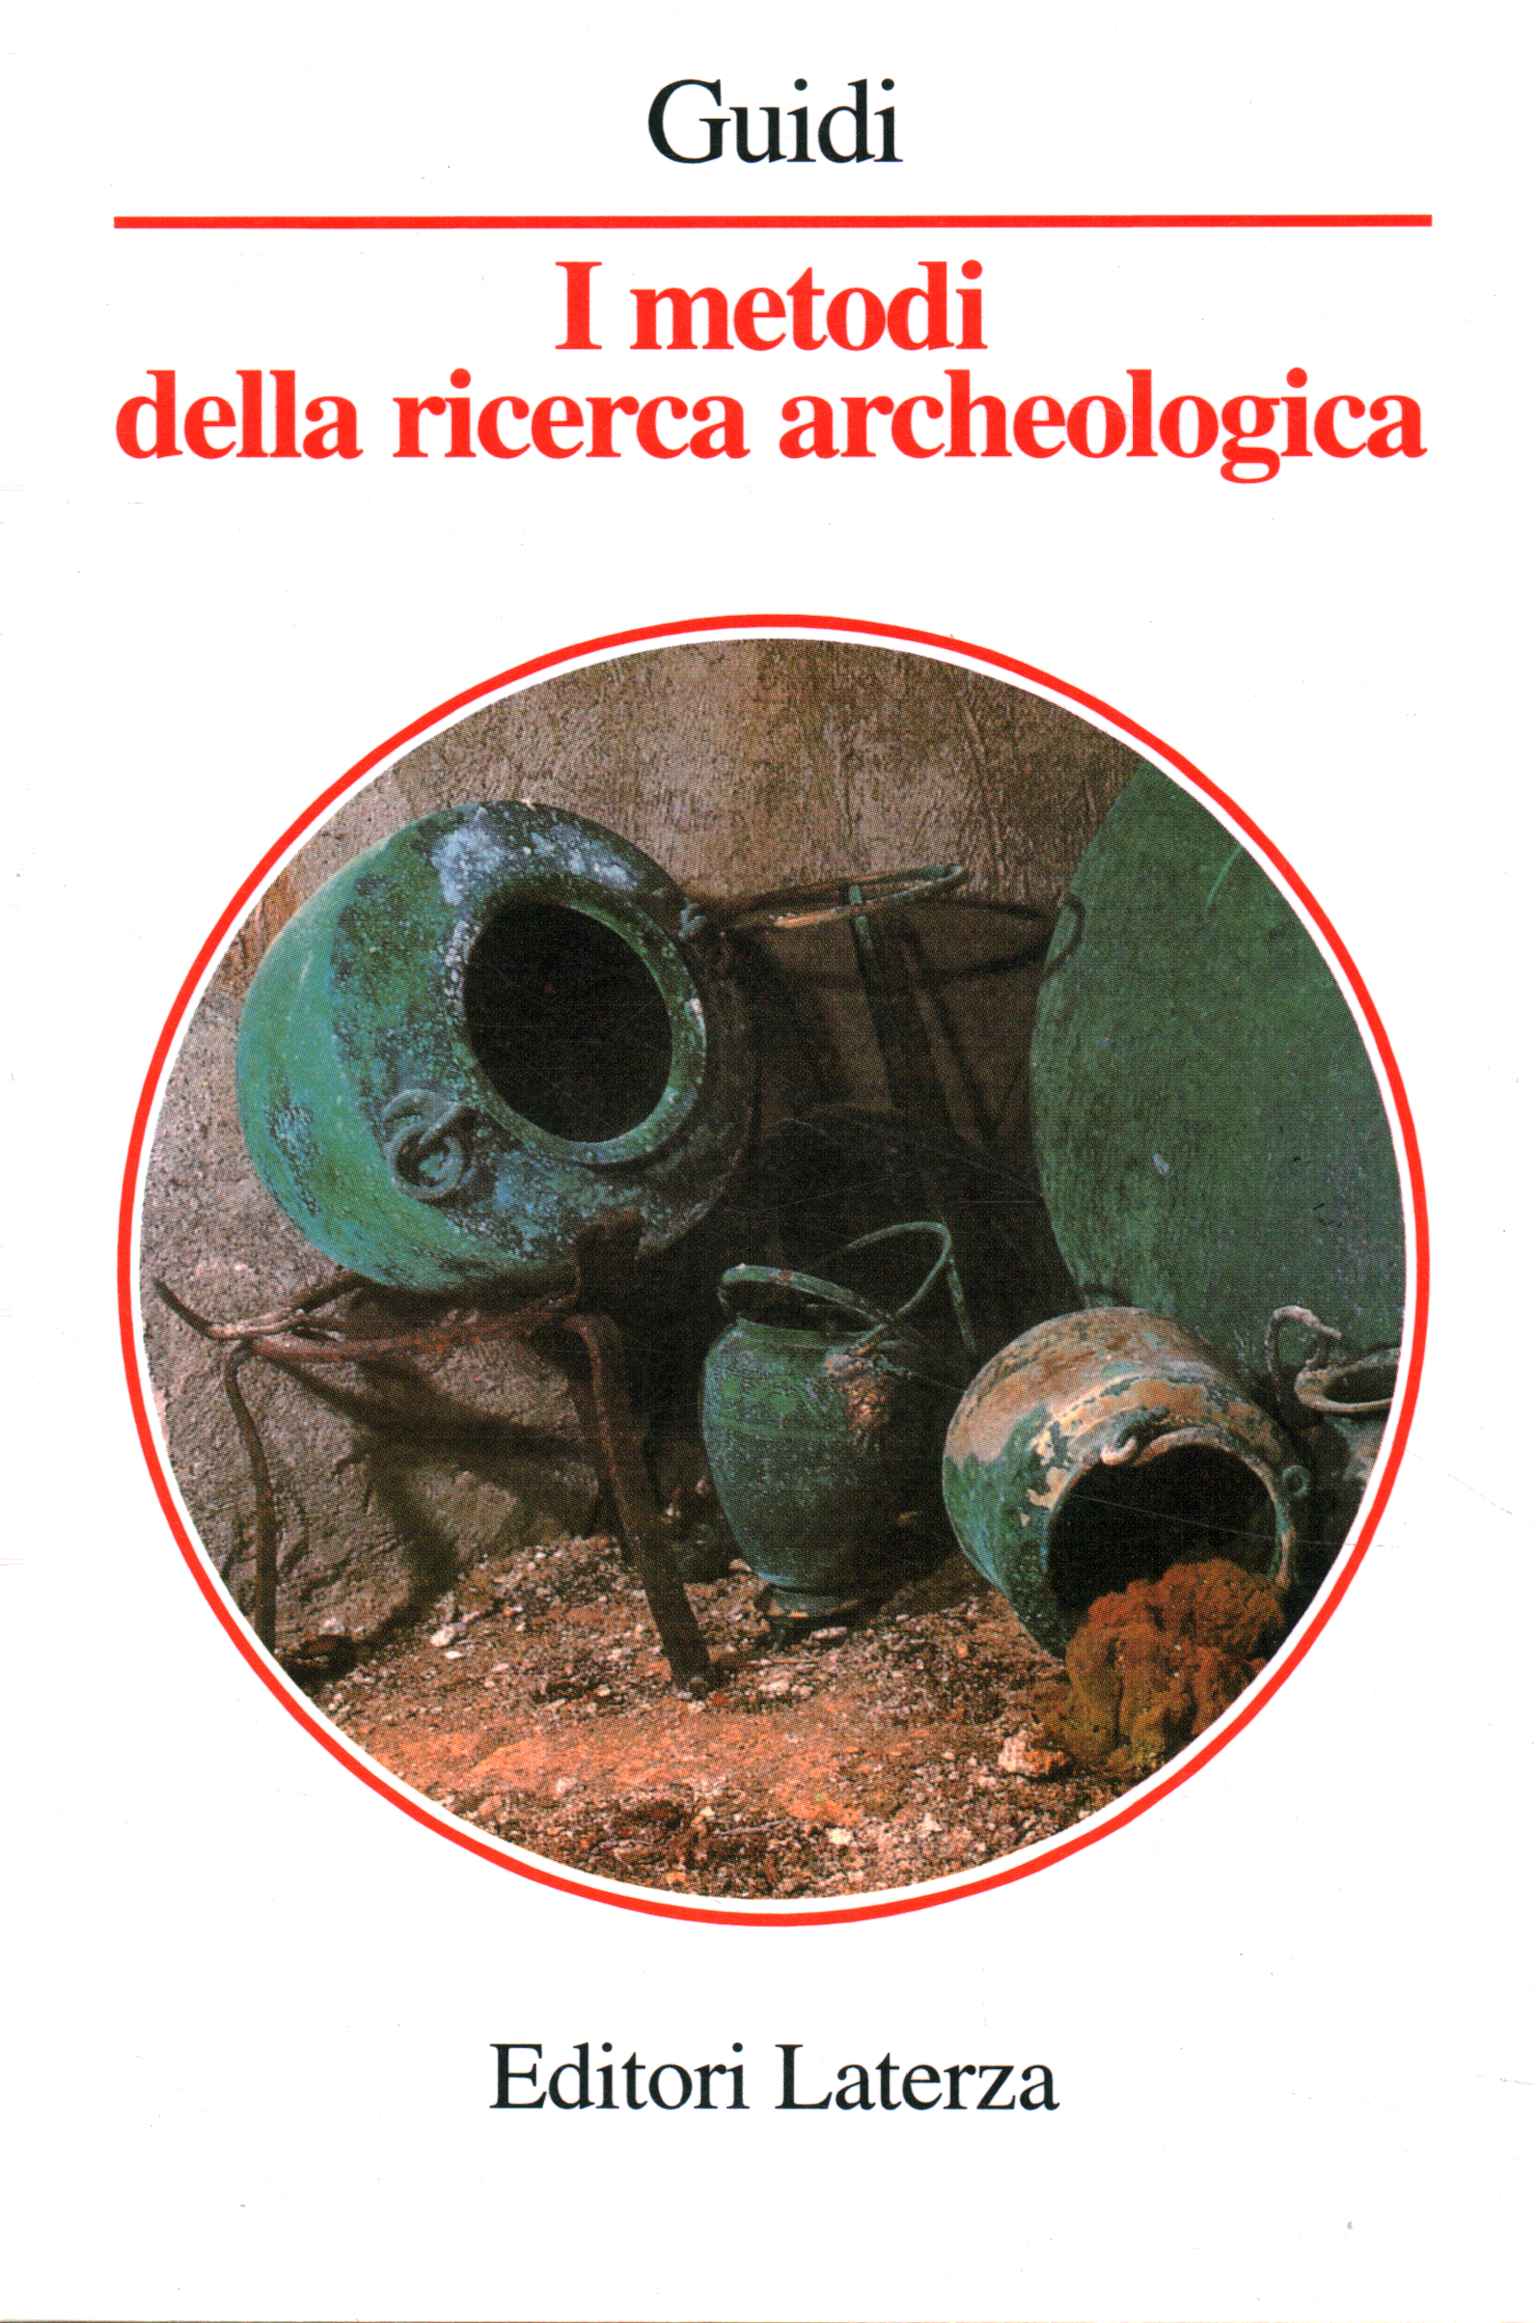 The methods of archaeological research